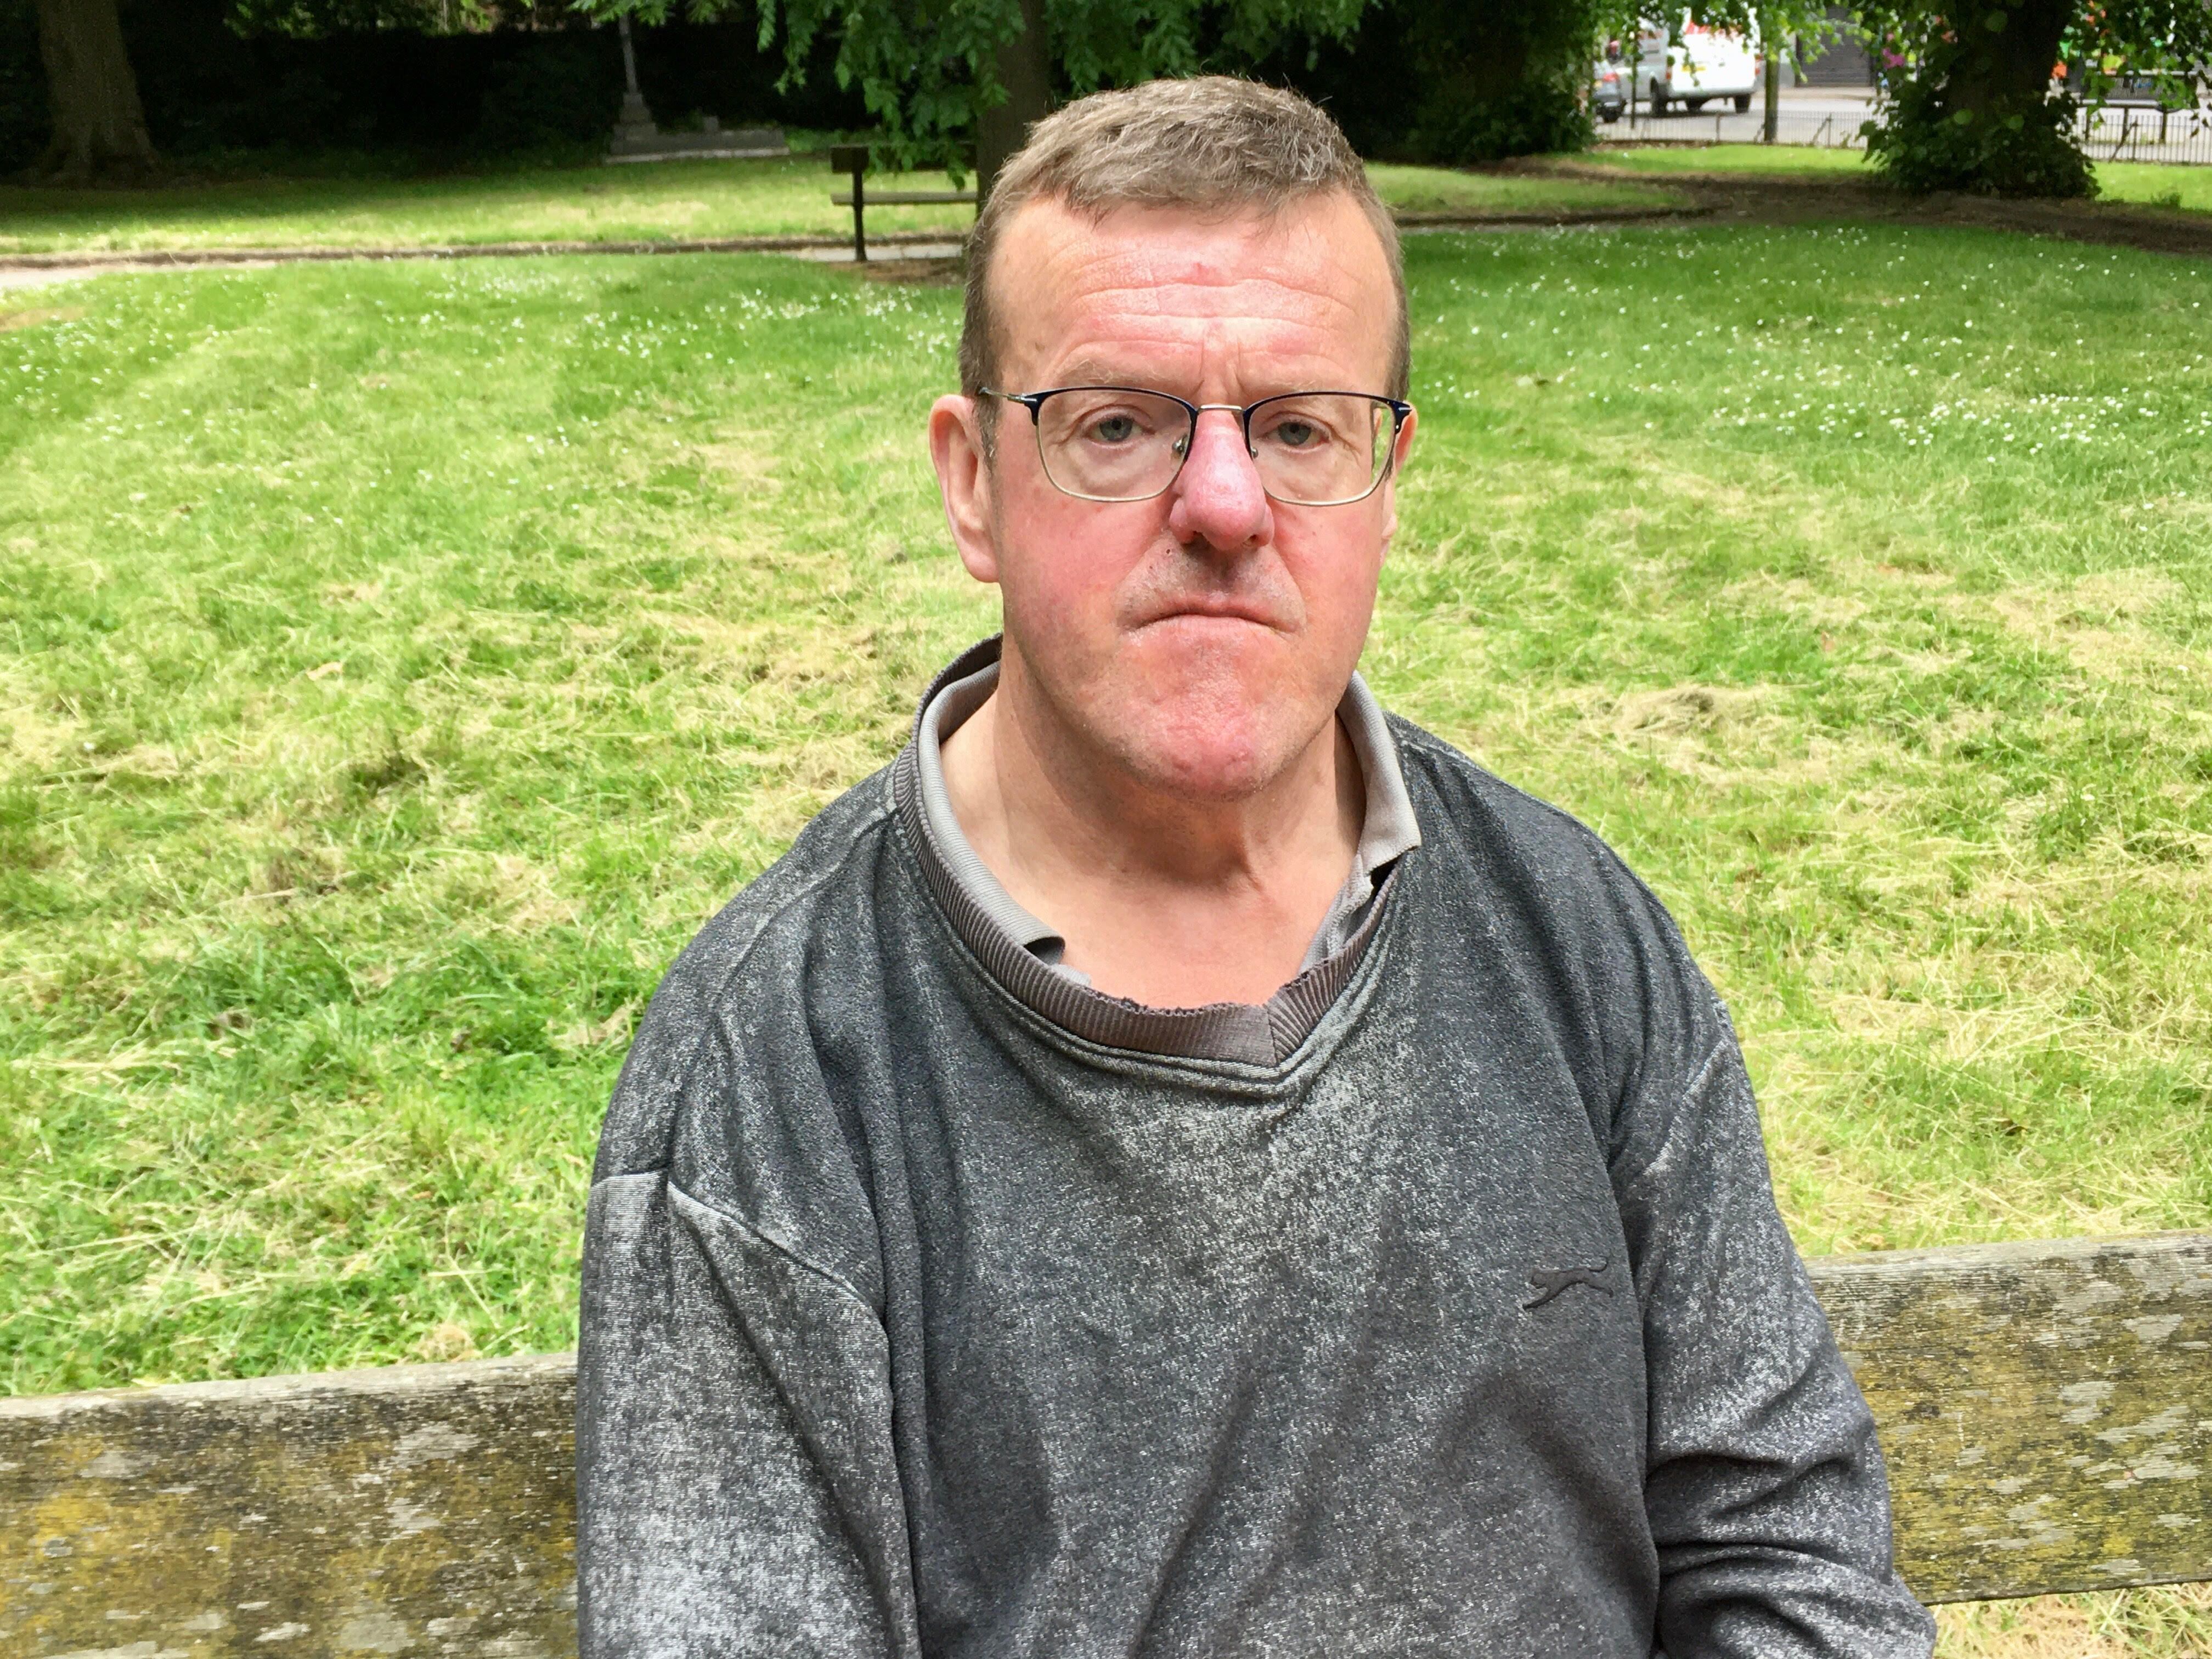 'I spoke to people in Bloxwich about their views on the General Election and there was an awful lot of apathy'